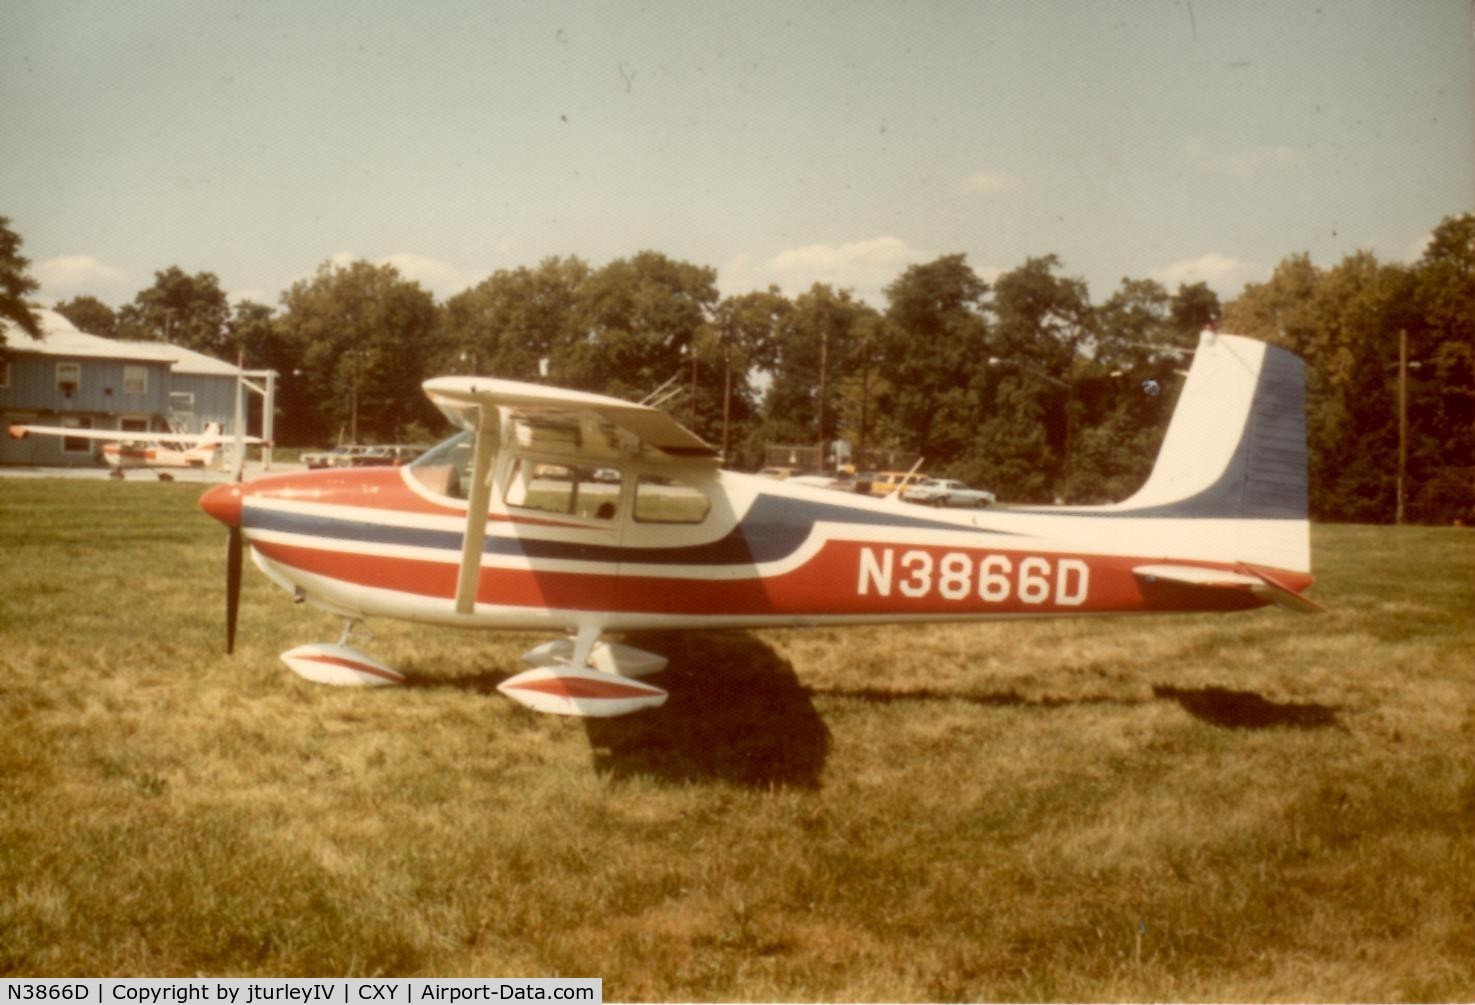 N3866D, 1957 Cessna 182A Skylane C/N 34566, Once upon a time - Miss Skylane was in New Cumberland PA